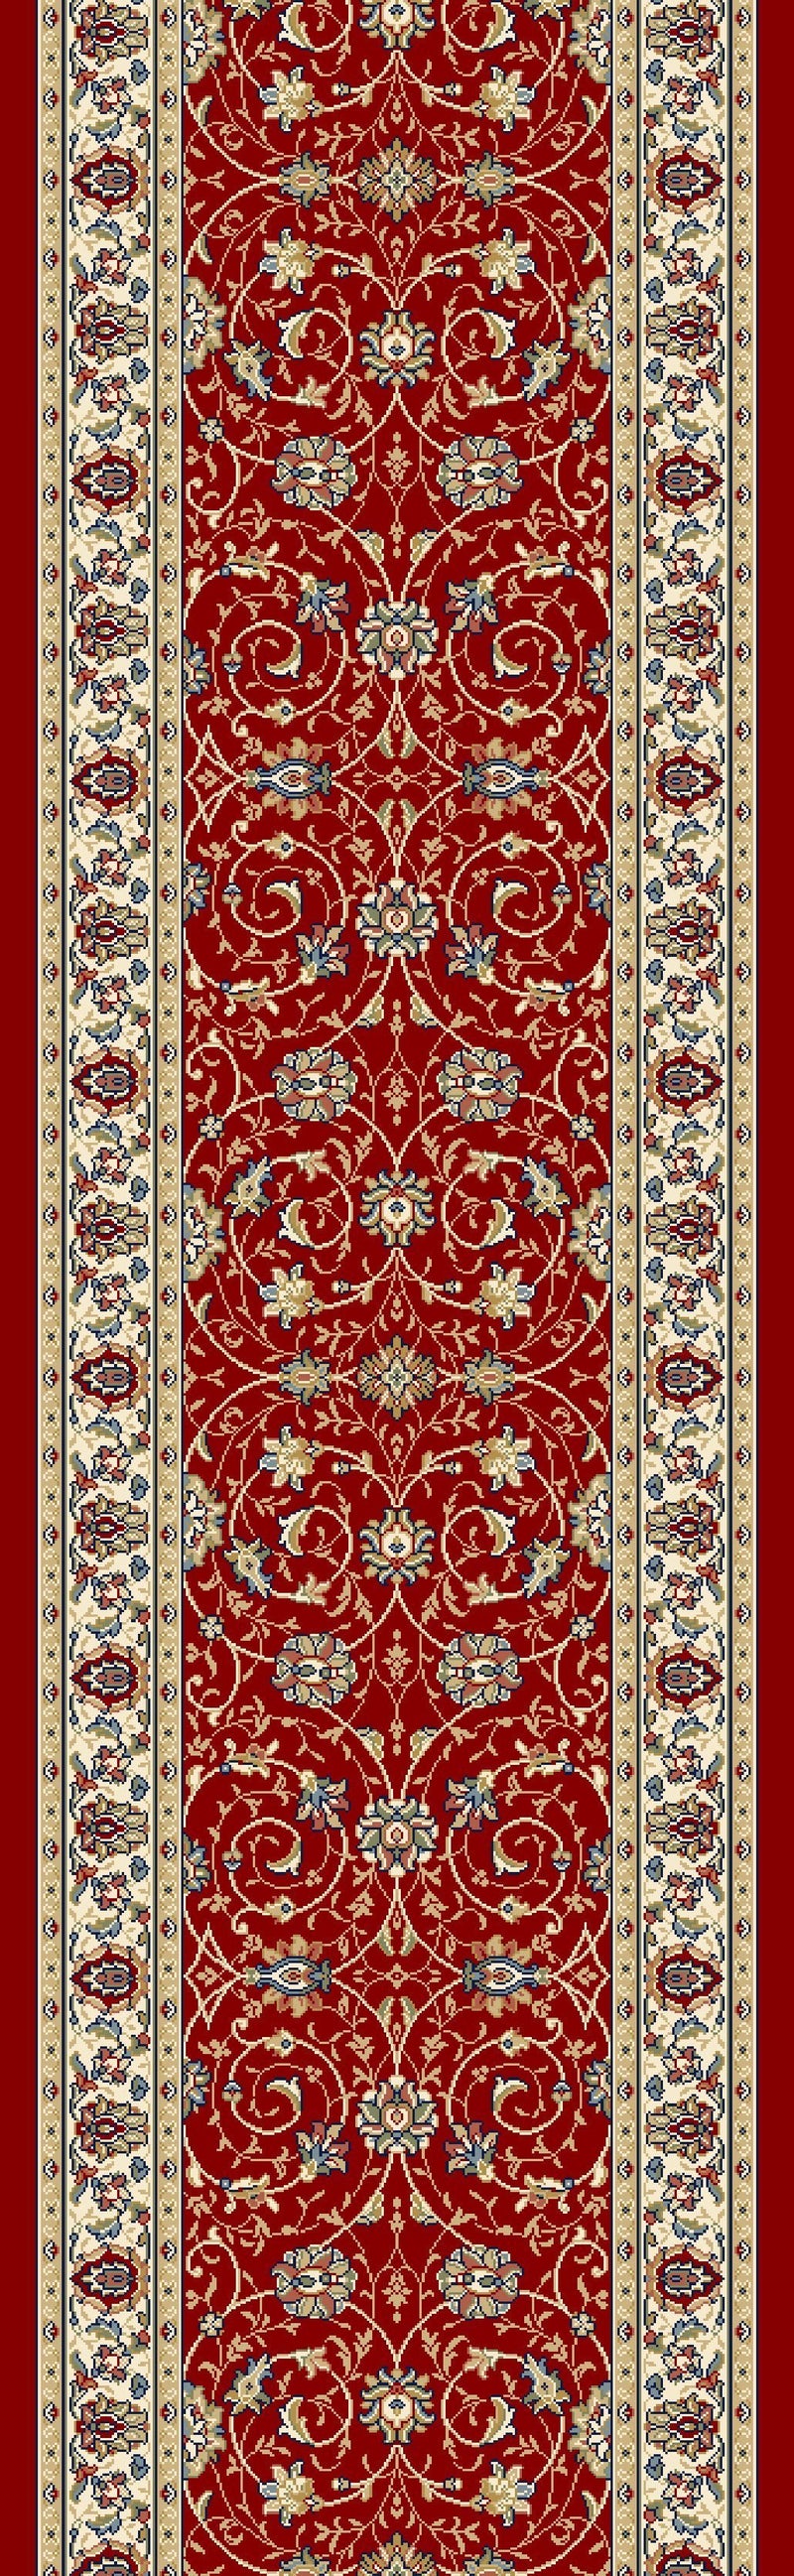 Dynamic Area Rugs 26in x 1Ft-Sold By The Foot Ancient Garden Area Rugs 57120-1464 Red 100% Poly 